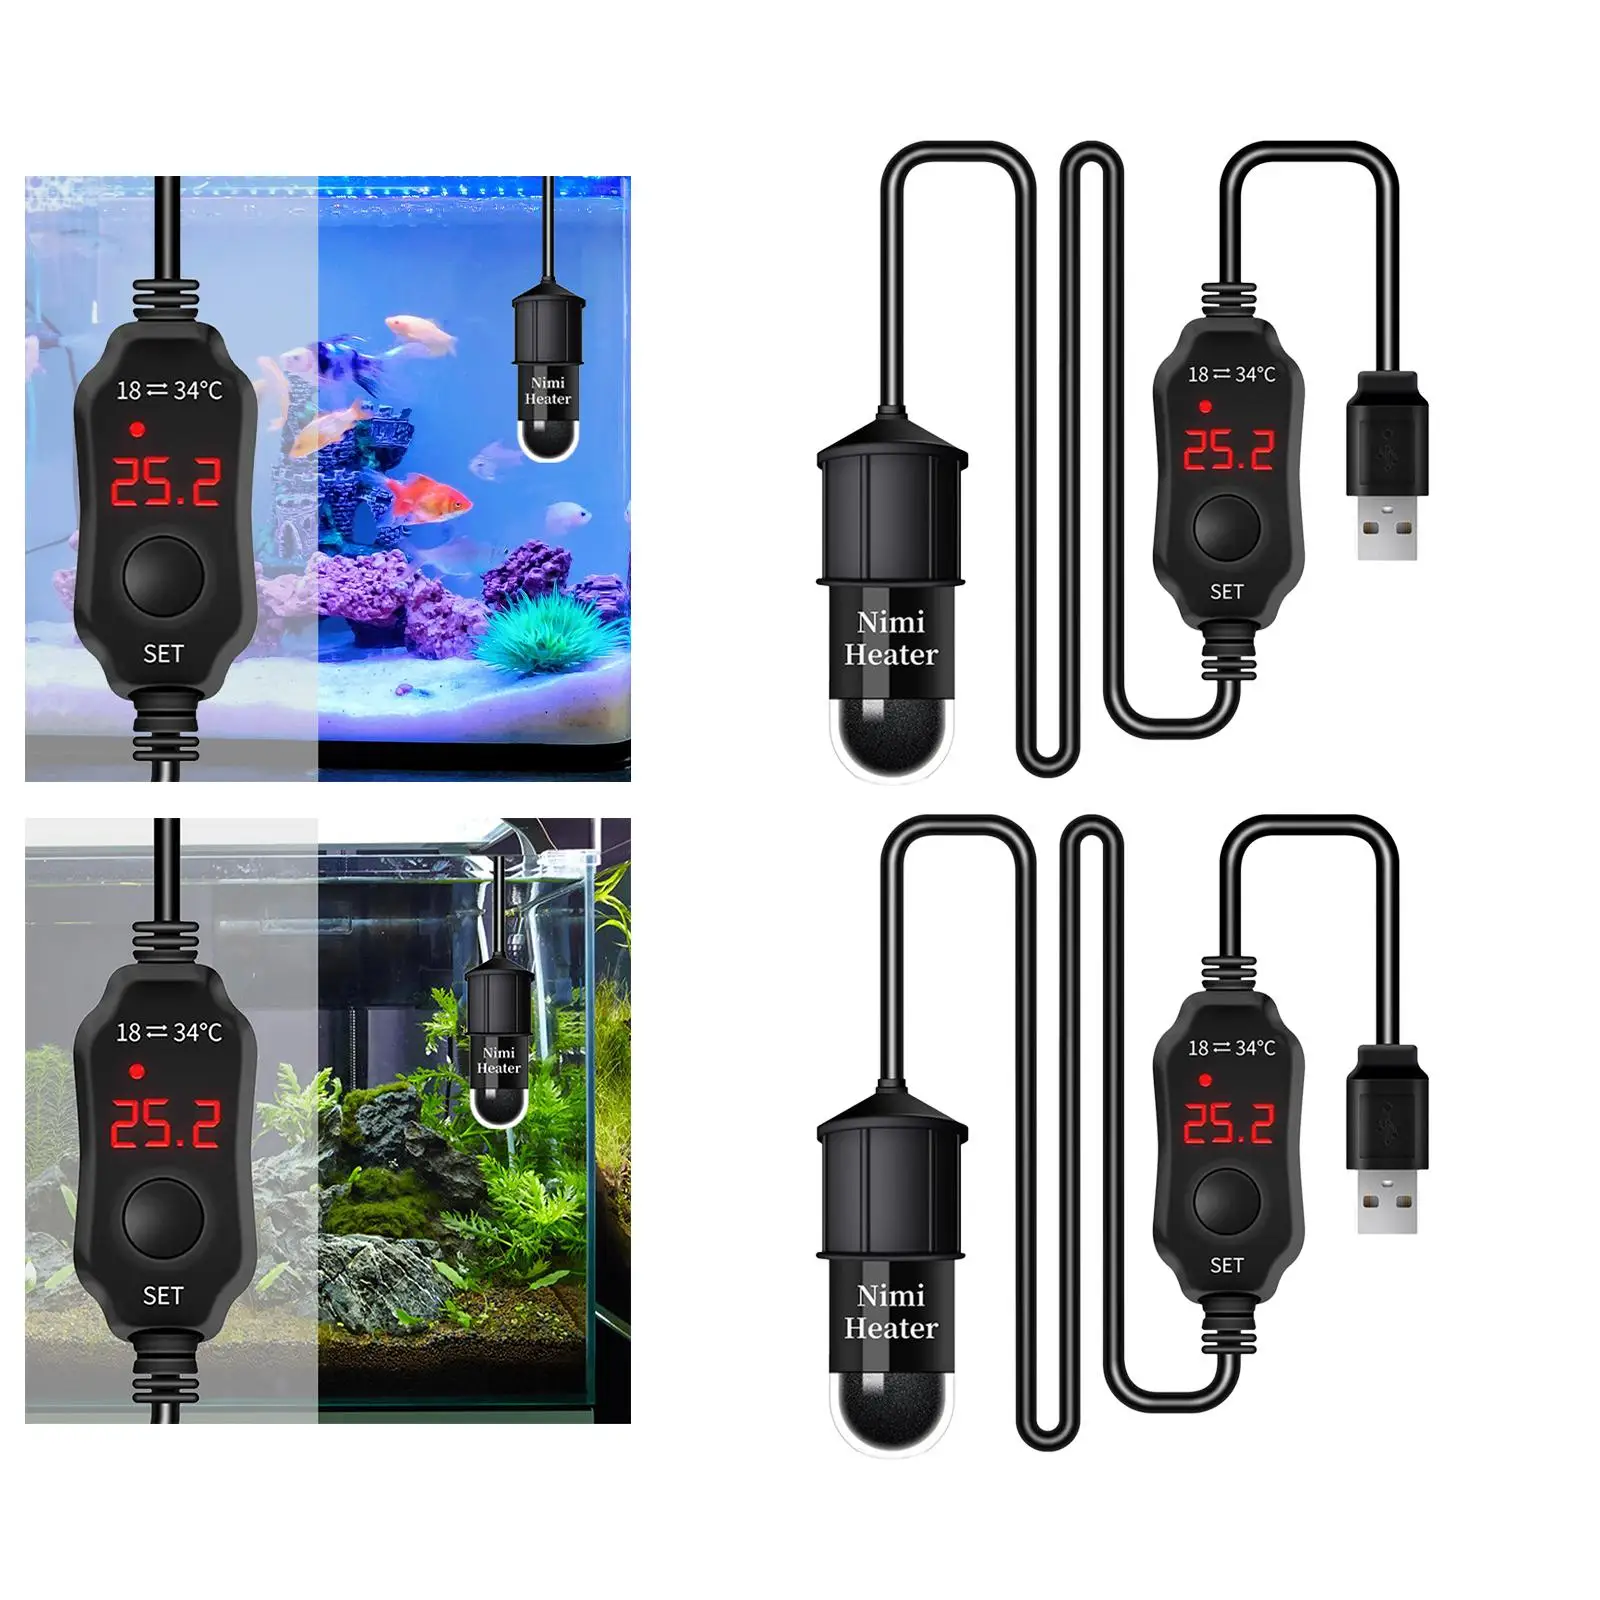 Aquarium Fish Tank Heater Mini for Saltwater and Freshwater 10W Digital Display Adjustable Temps Controller Submersible Heater